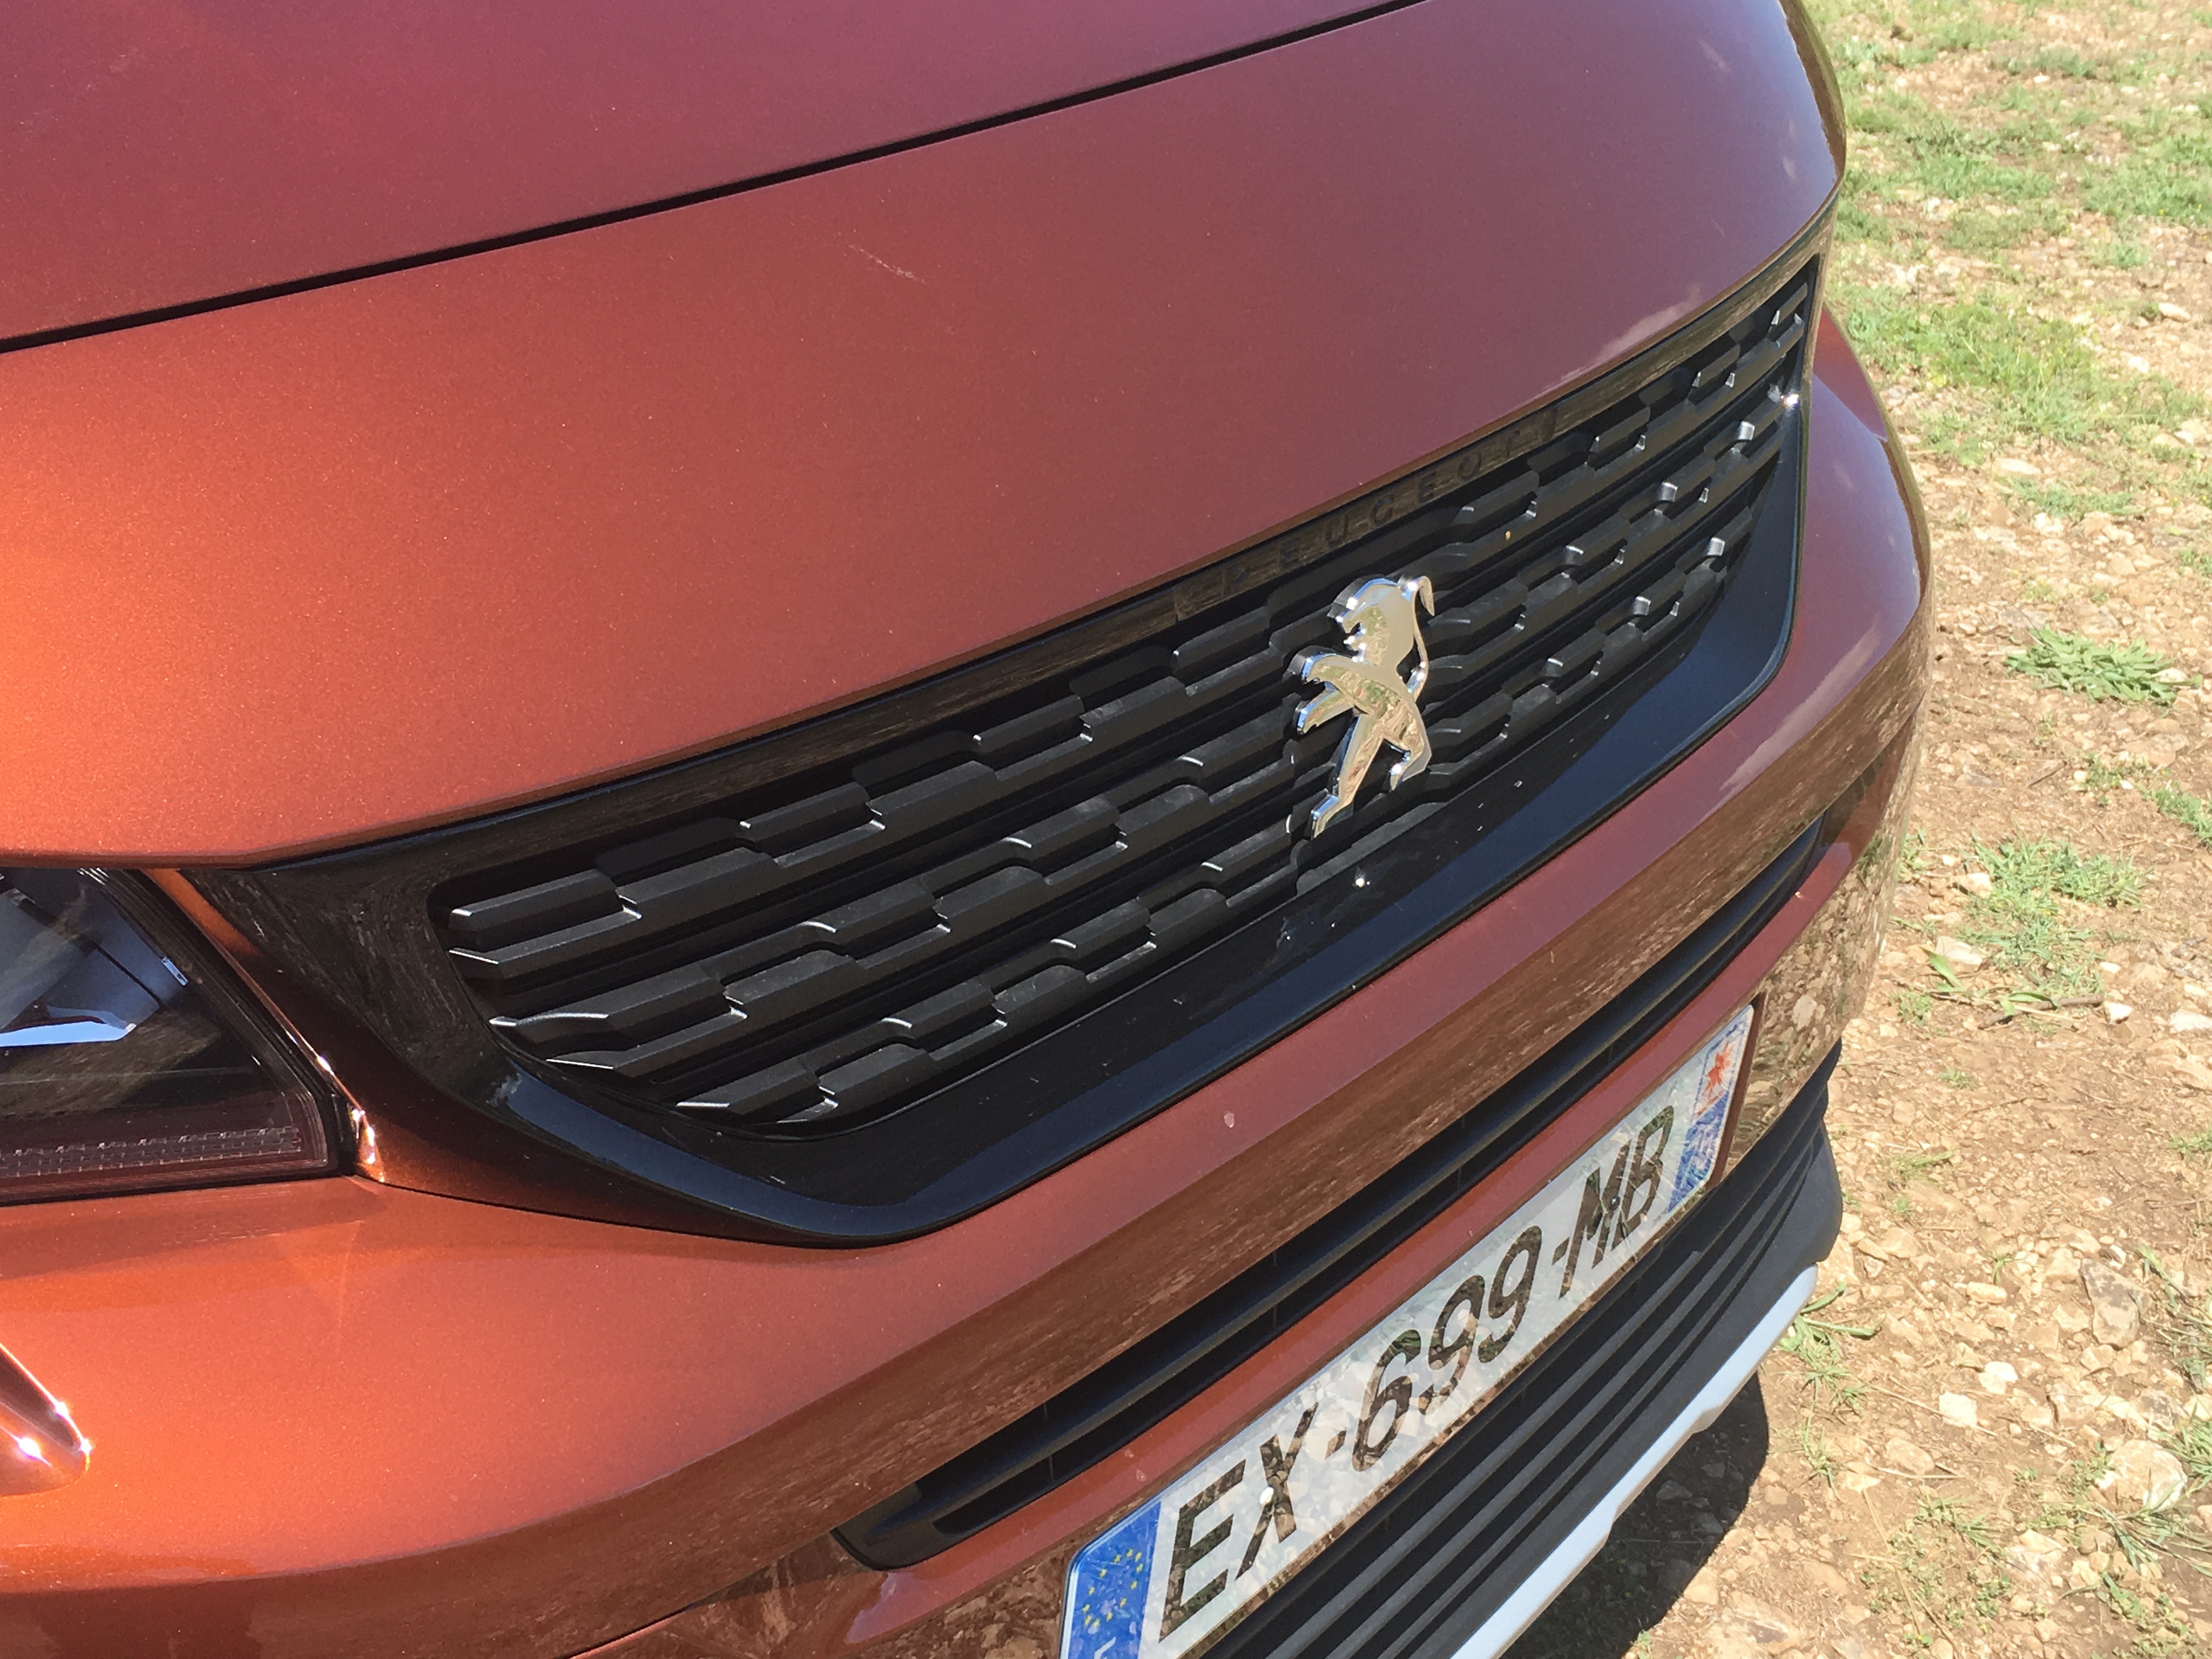 Peugeot Rifter accessories specifications